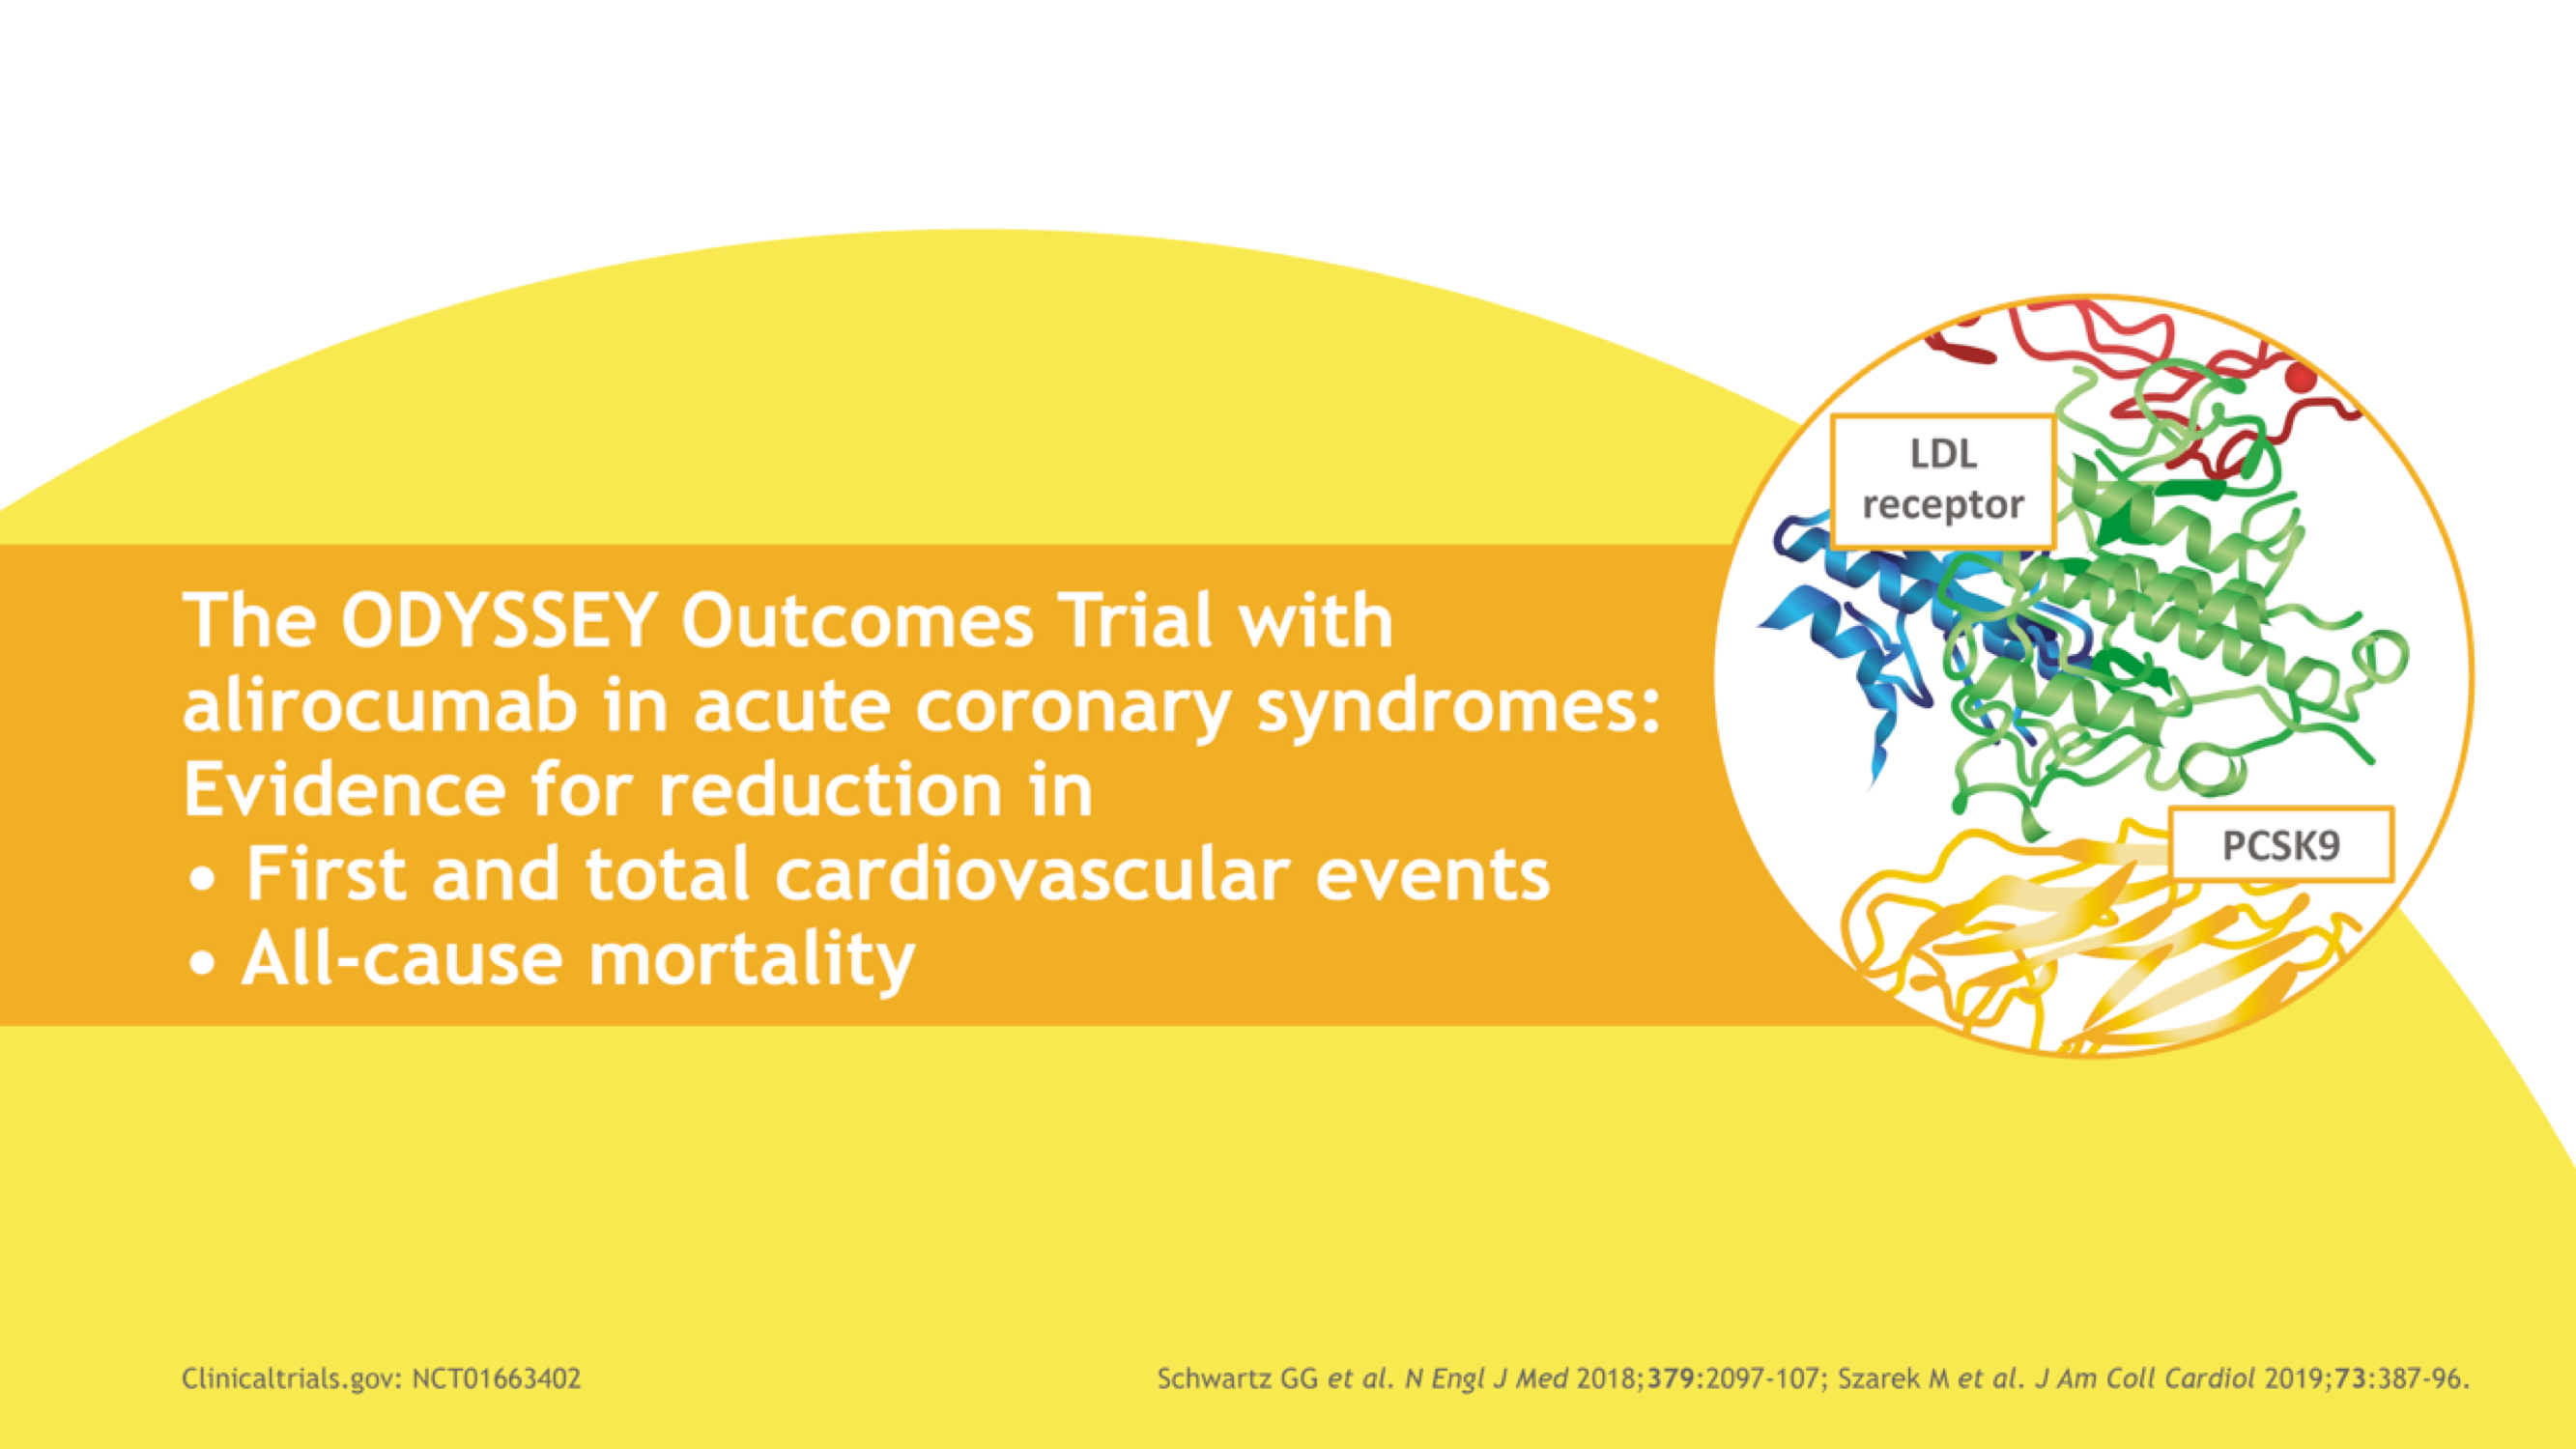 The ODYSSEY Outcomes trial with alirocumab in acute coronary syndromes